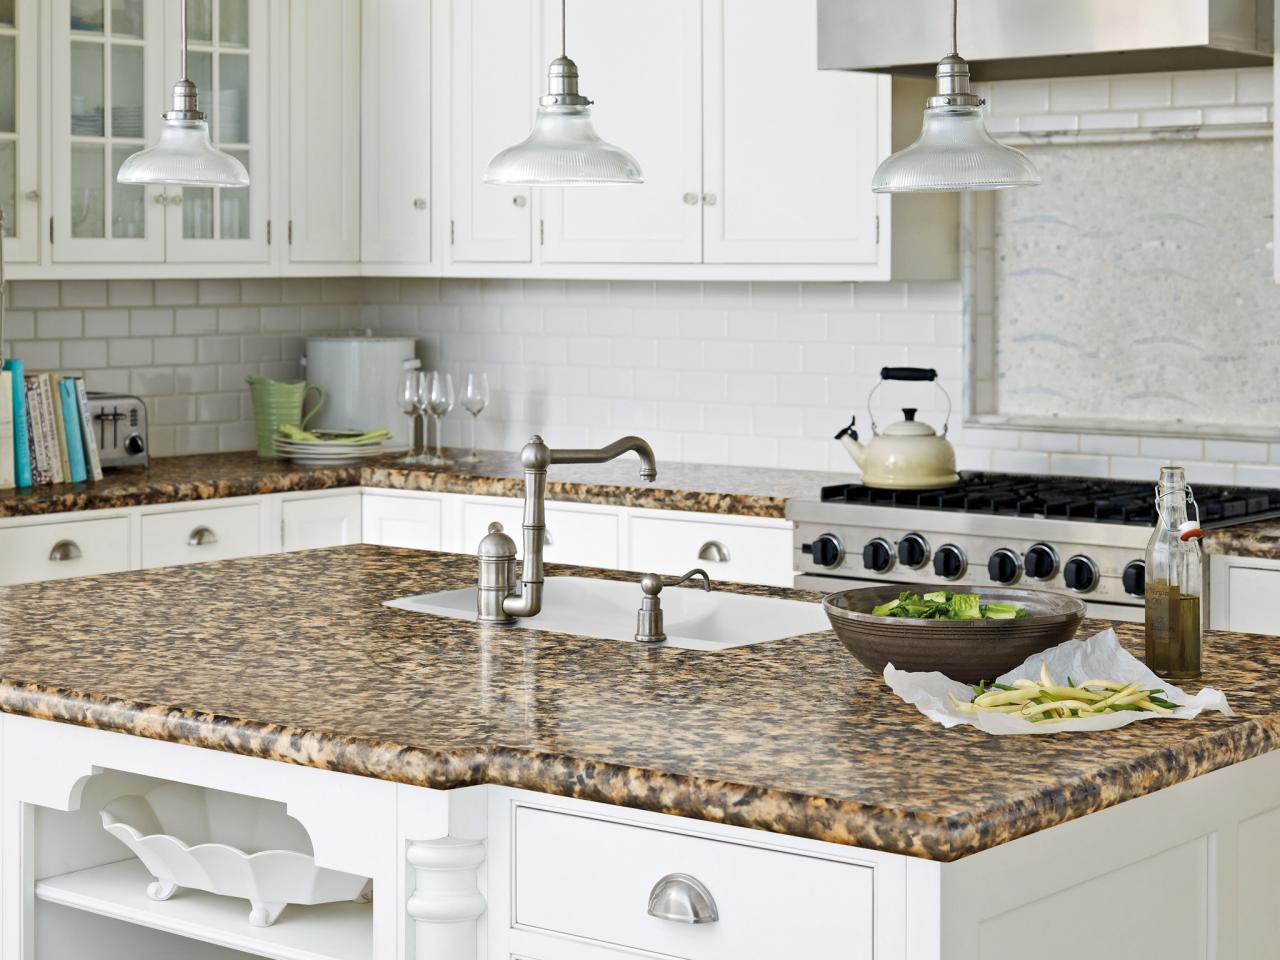 Laminate Kitchen Countertops Pictures & Ideas From HGTV   HGTV